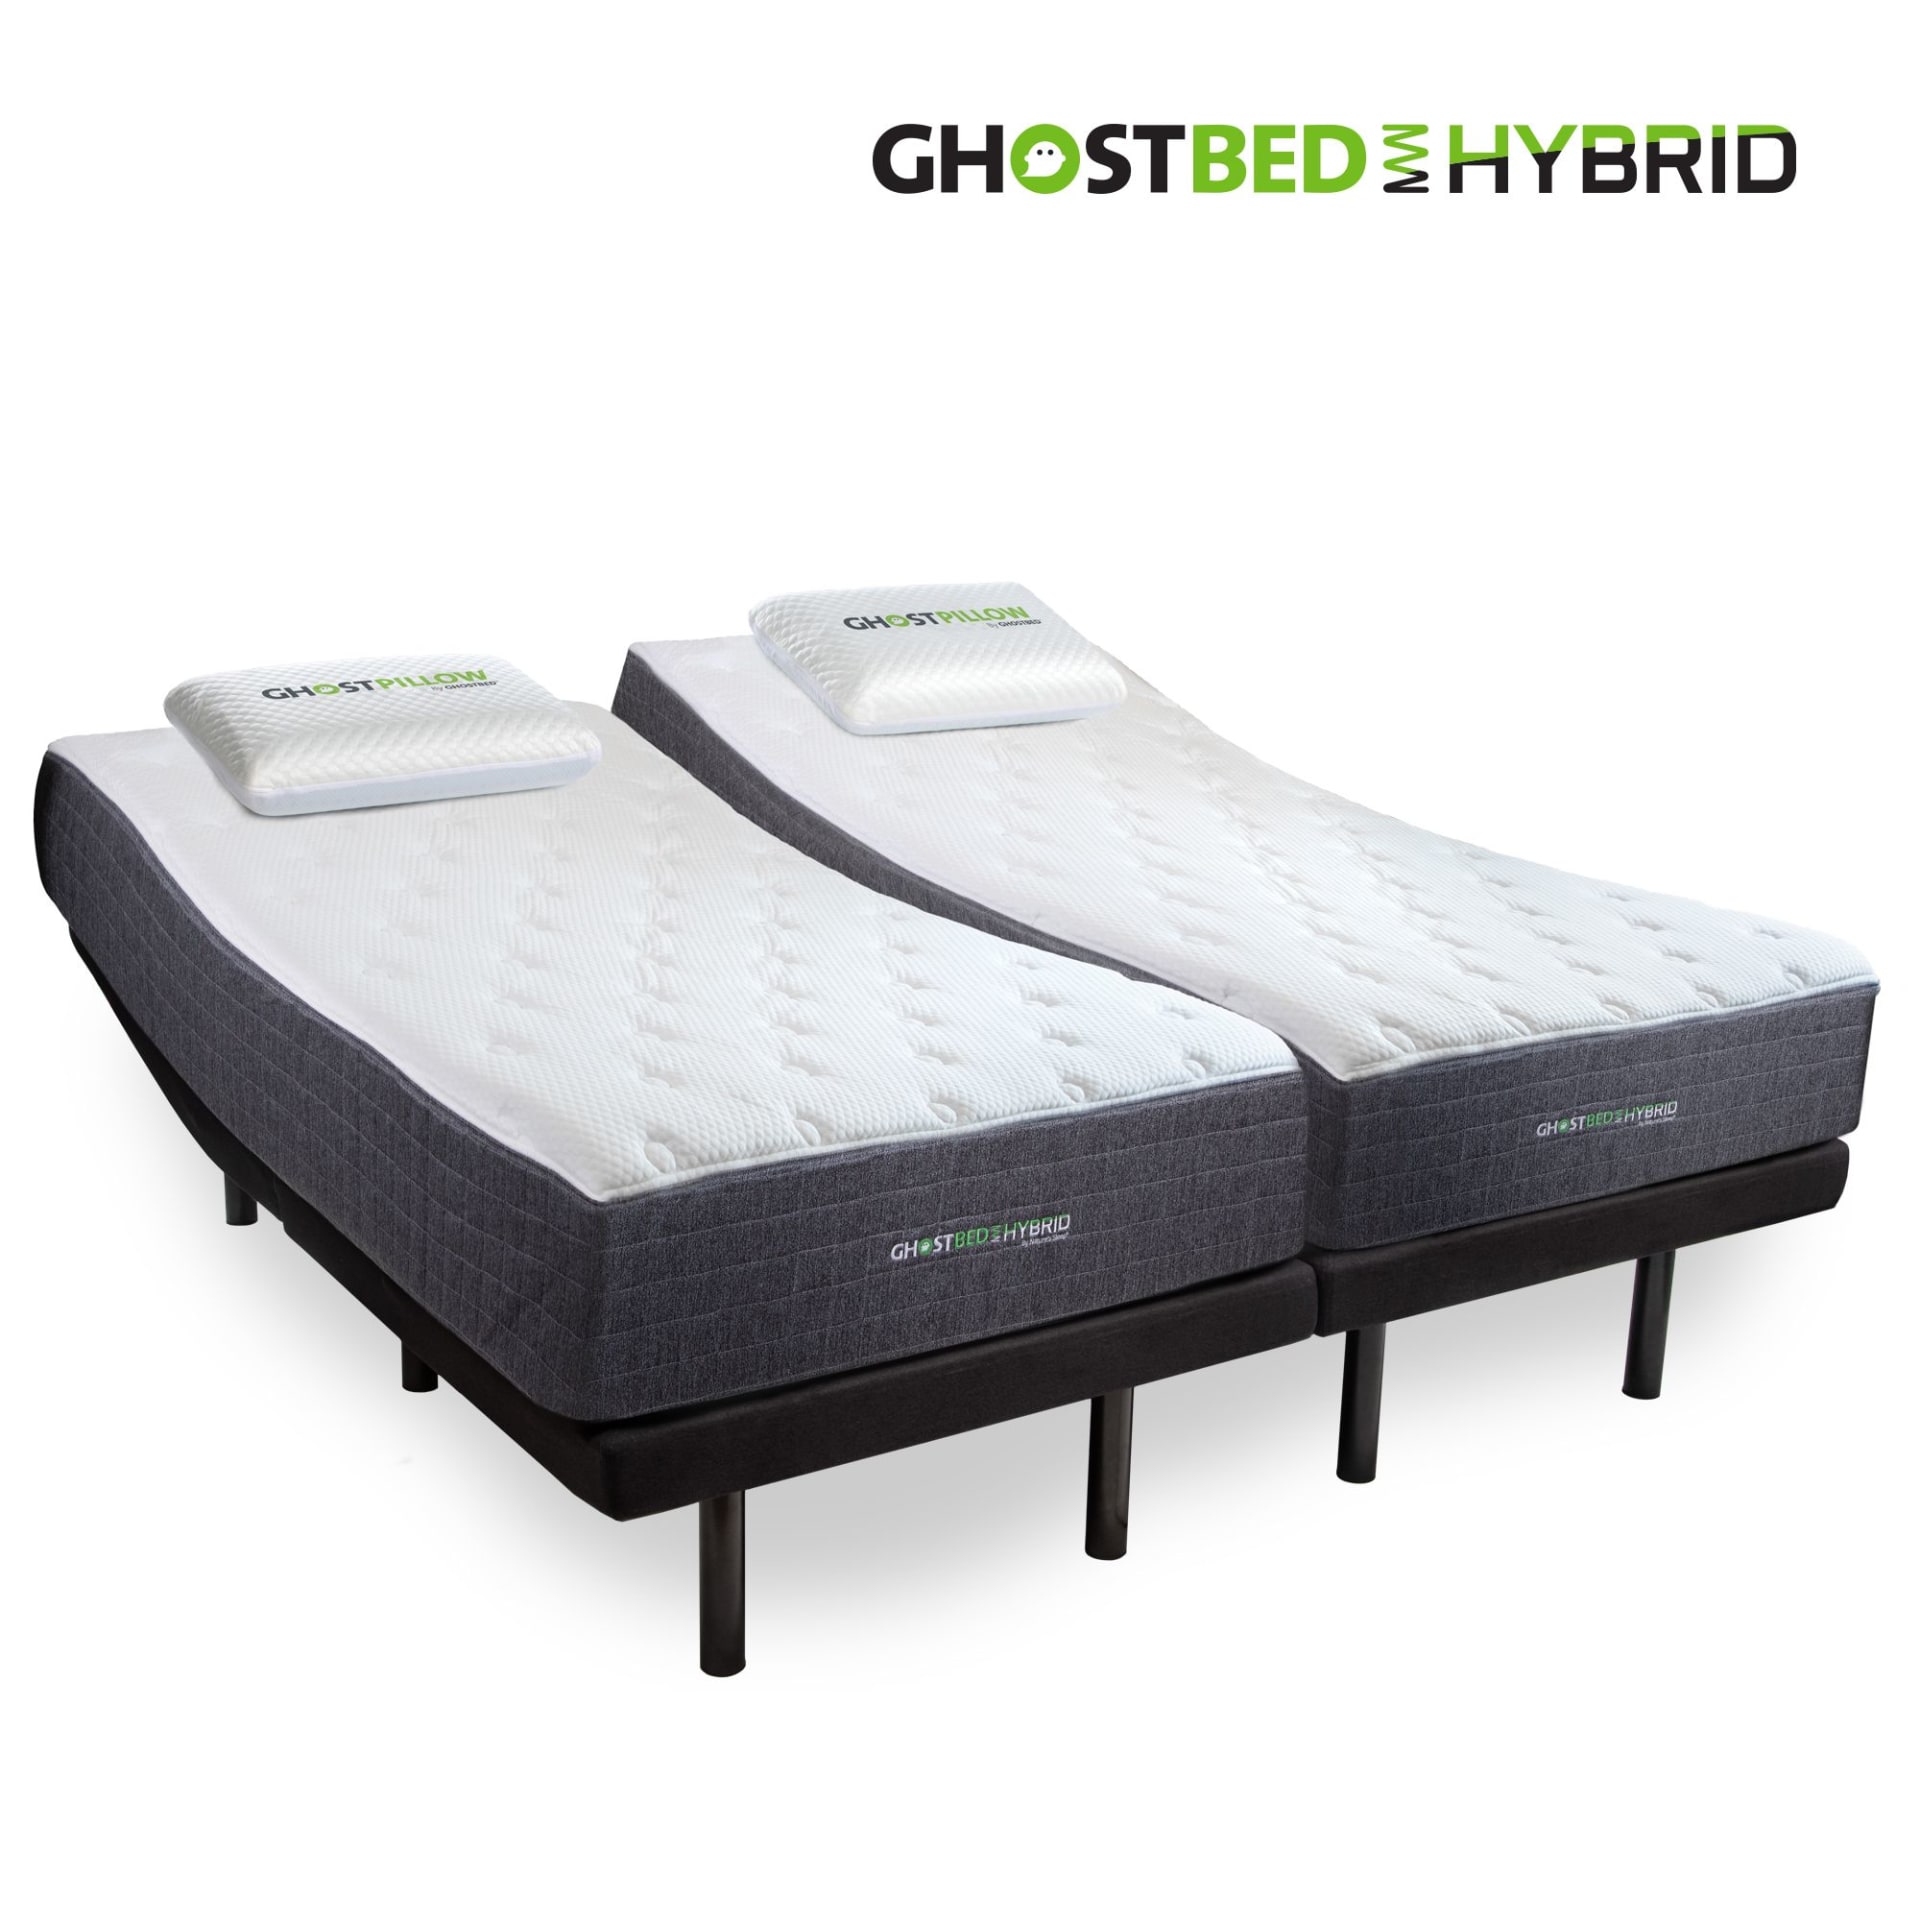 Ghostbed Hybrid 12 Mattress With, Can You Use A Hybrid Mattress On An Adjustable Bed